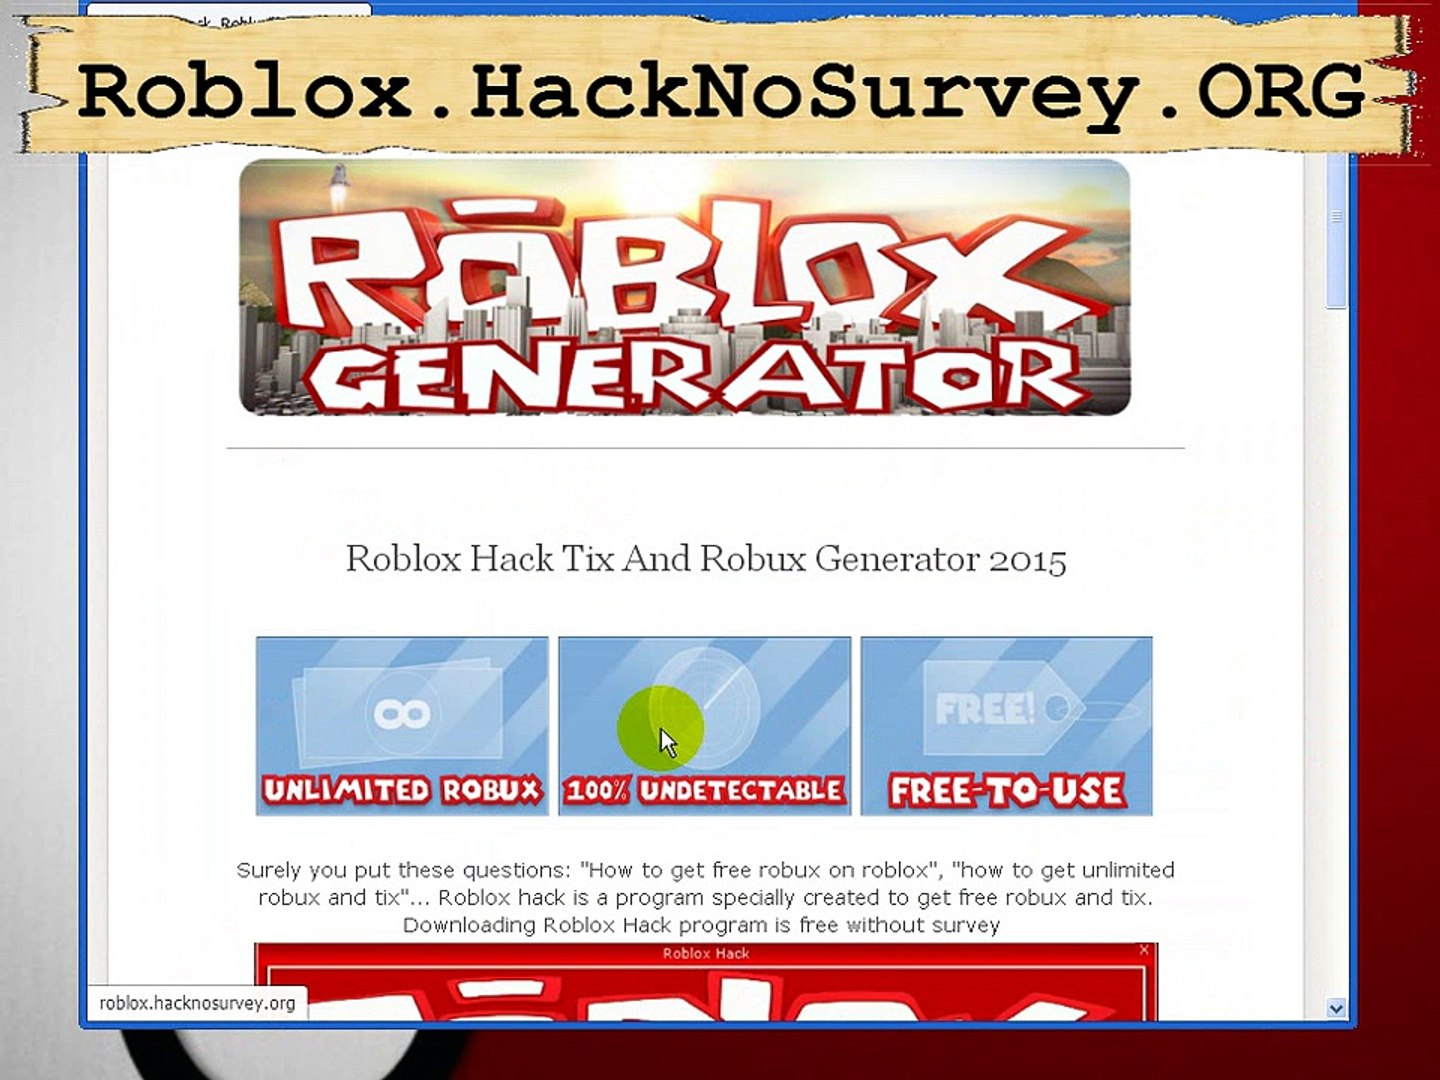 Roblox Hack February 2015 Unlimited Robuxtix And Membership Hack 2015 - 